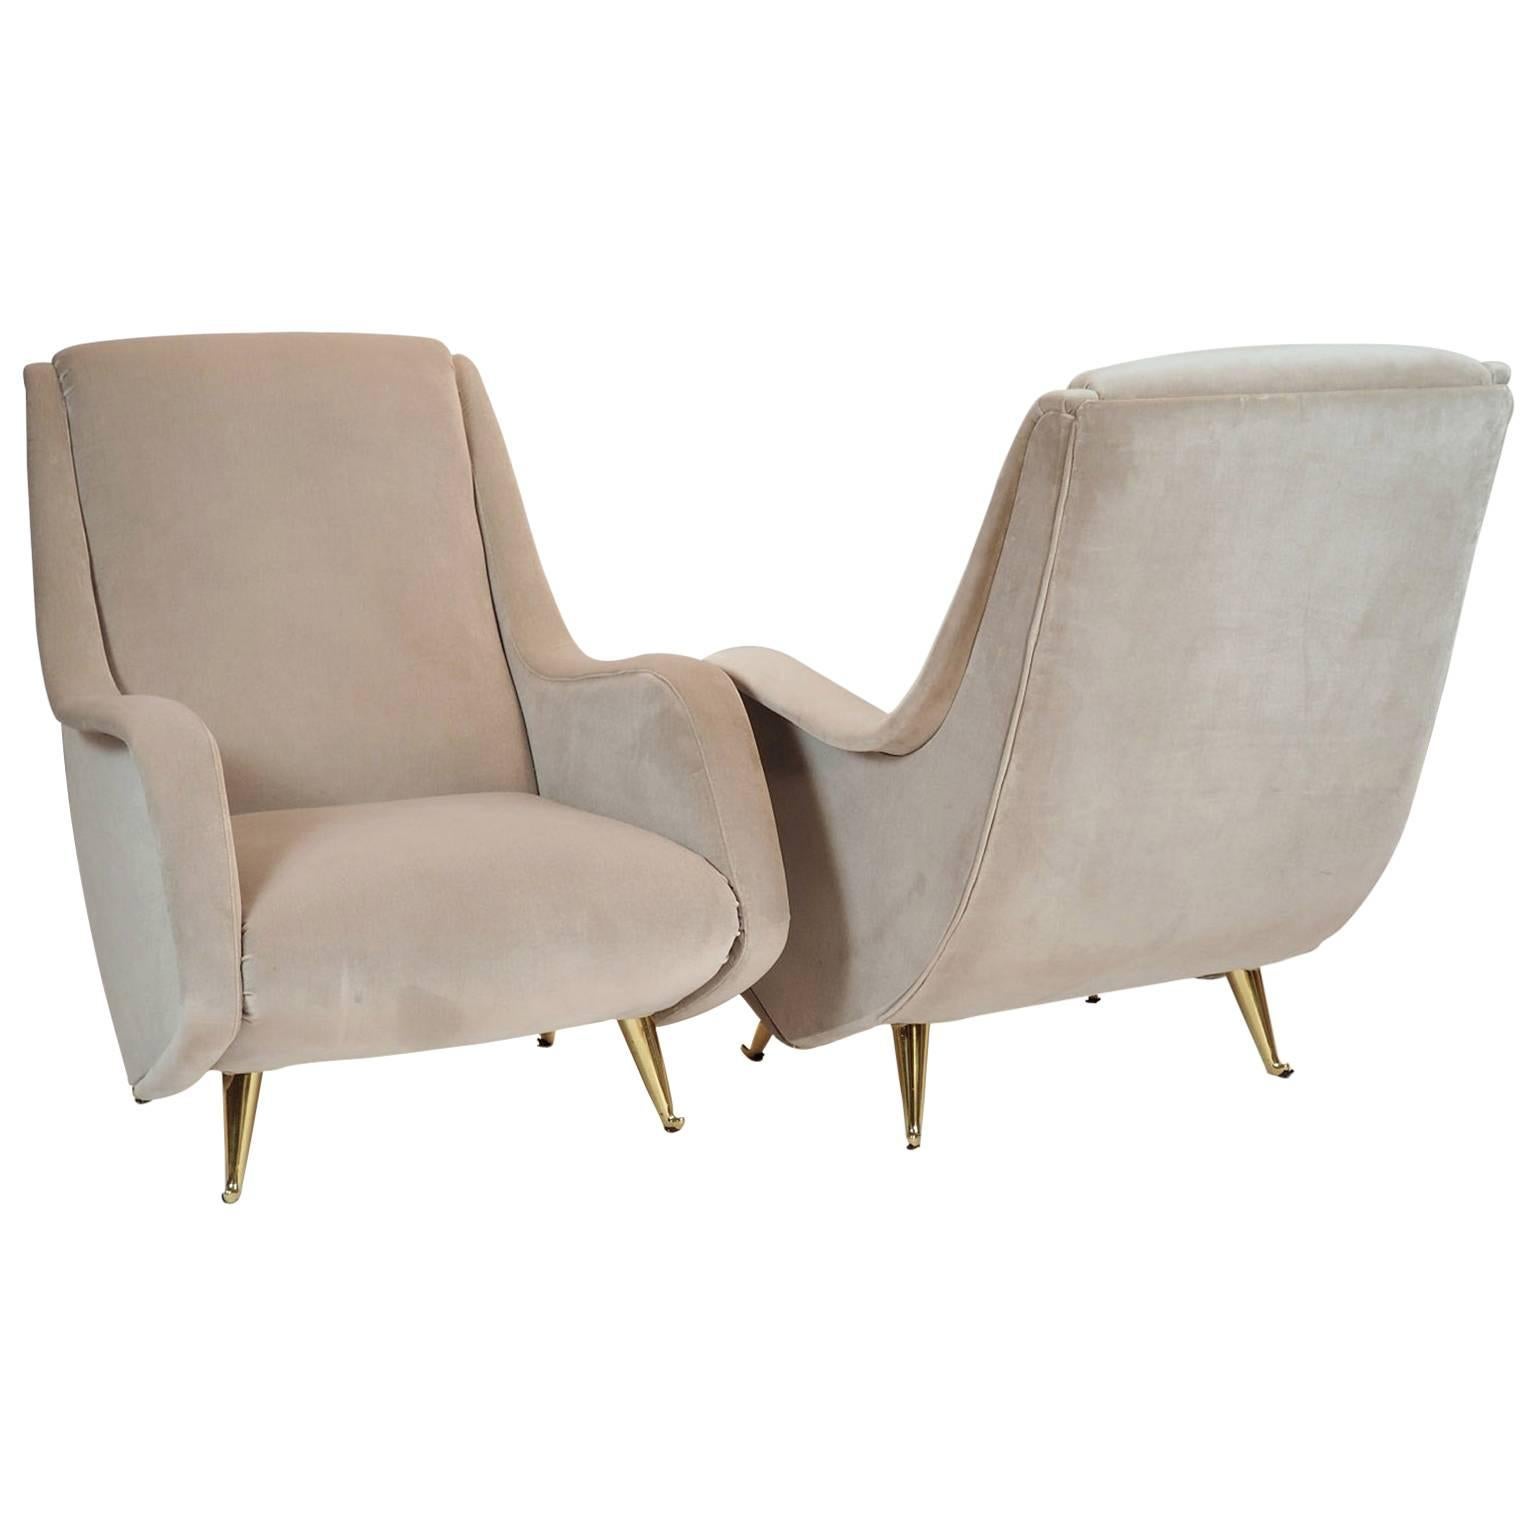 Charming and comfortable armchairs.
Velvet upholstery in elegant light grey / dove color, rounded brass feet.
Reupholstered with Italian pure cotton velvet, soft and strong.